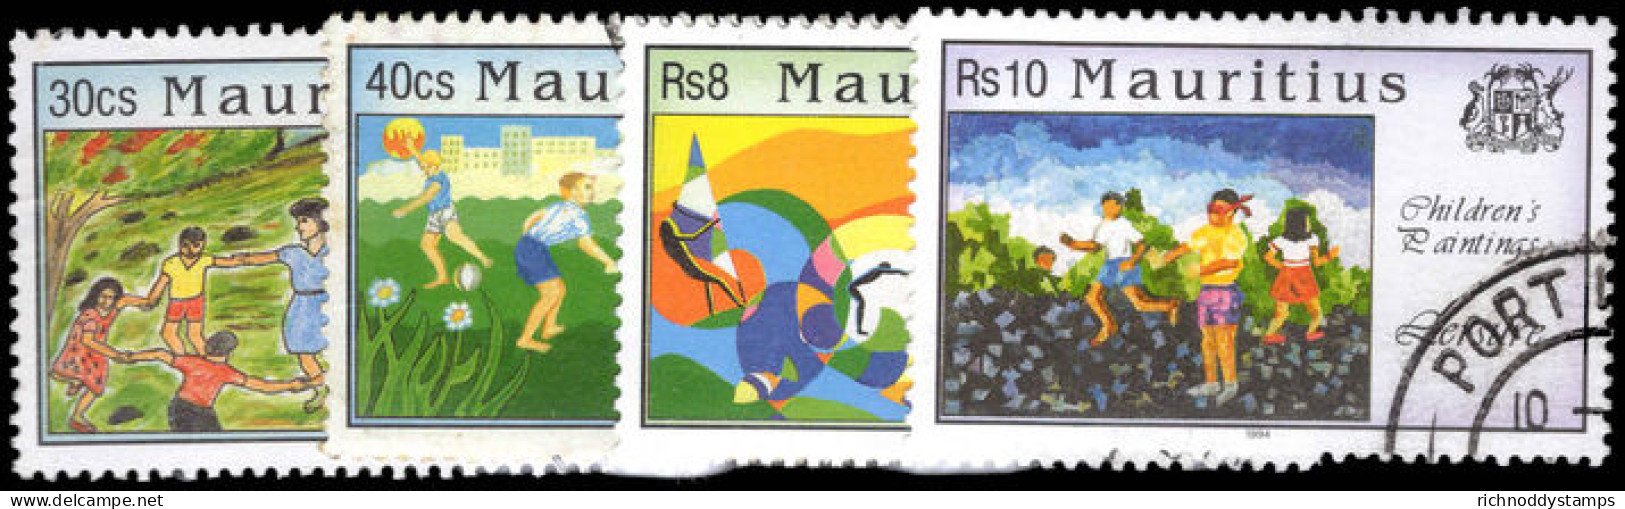 Mauritius 1994 Childrens Paintings Fine Used. - Maurice (1968-...)